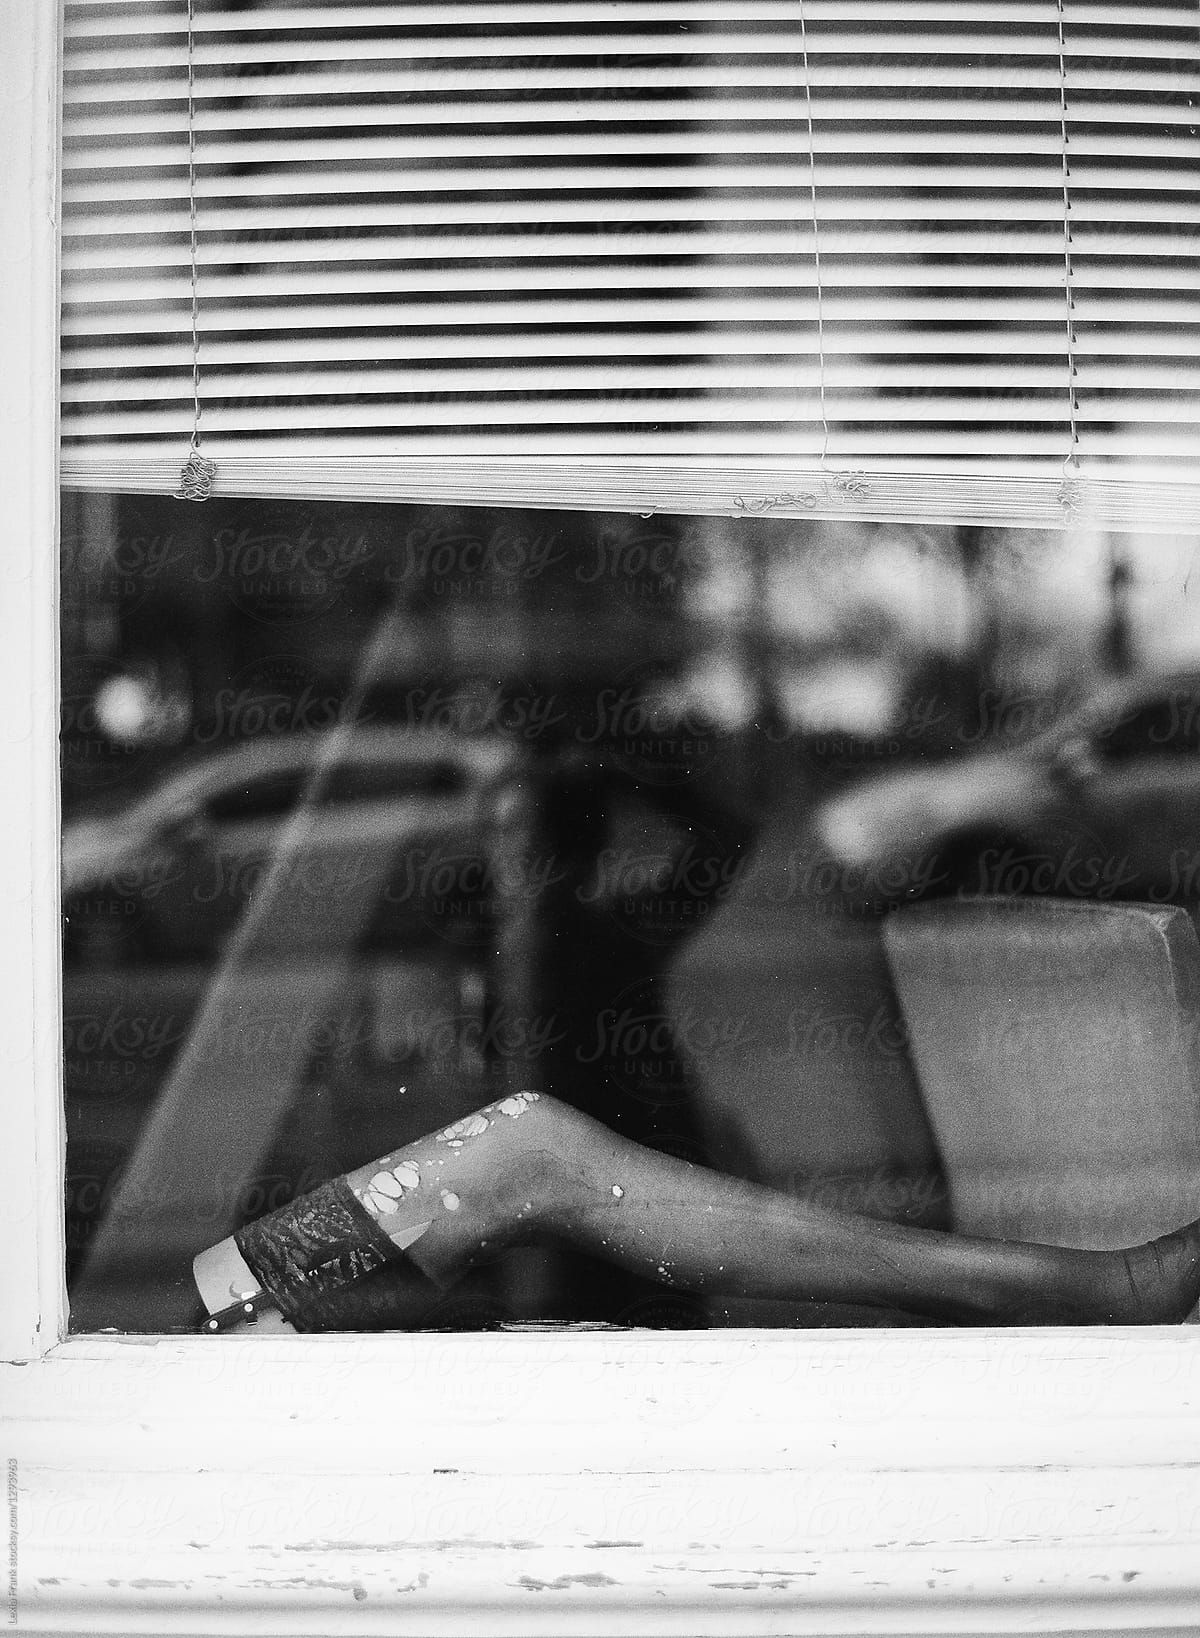 mannequin leg with torn stocking in window